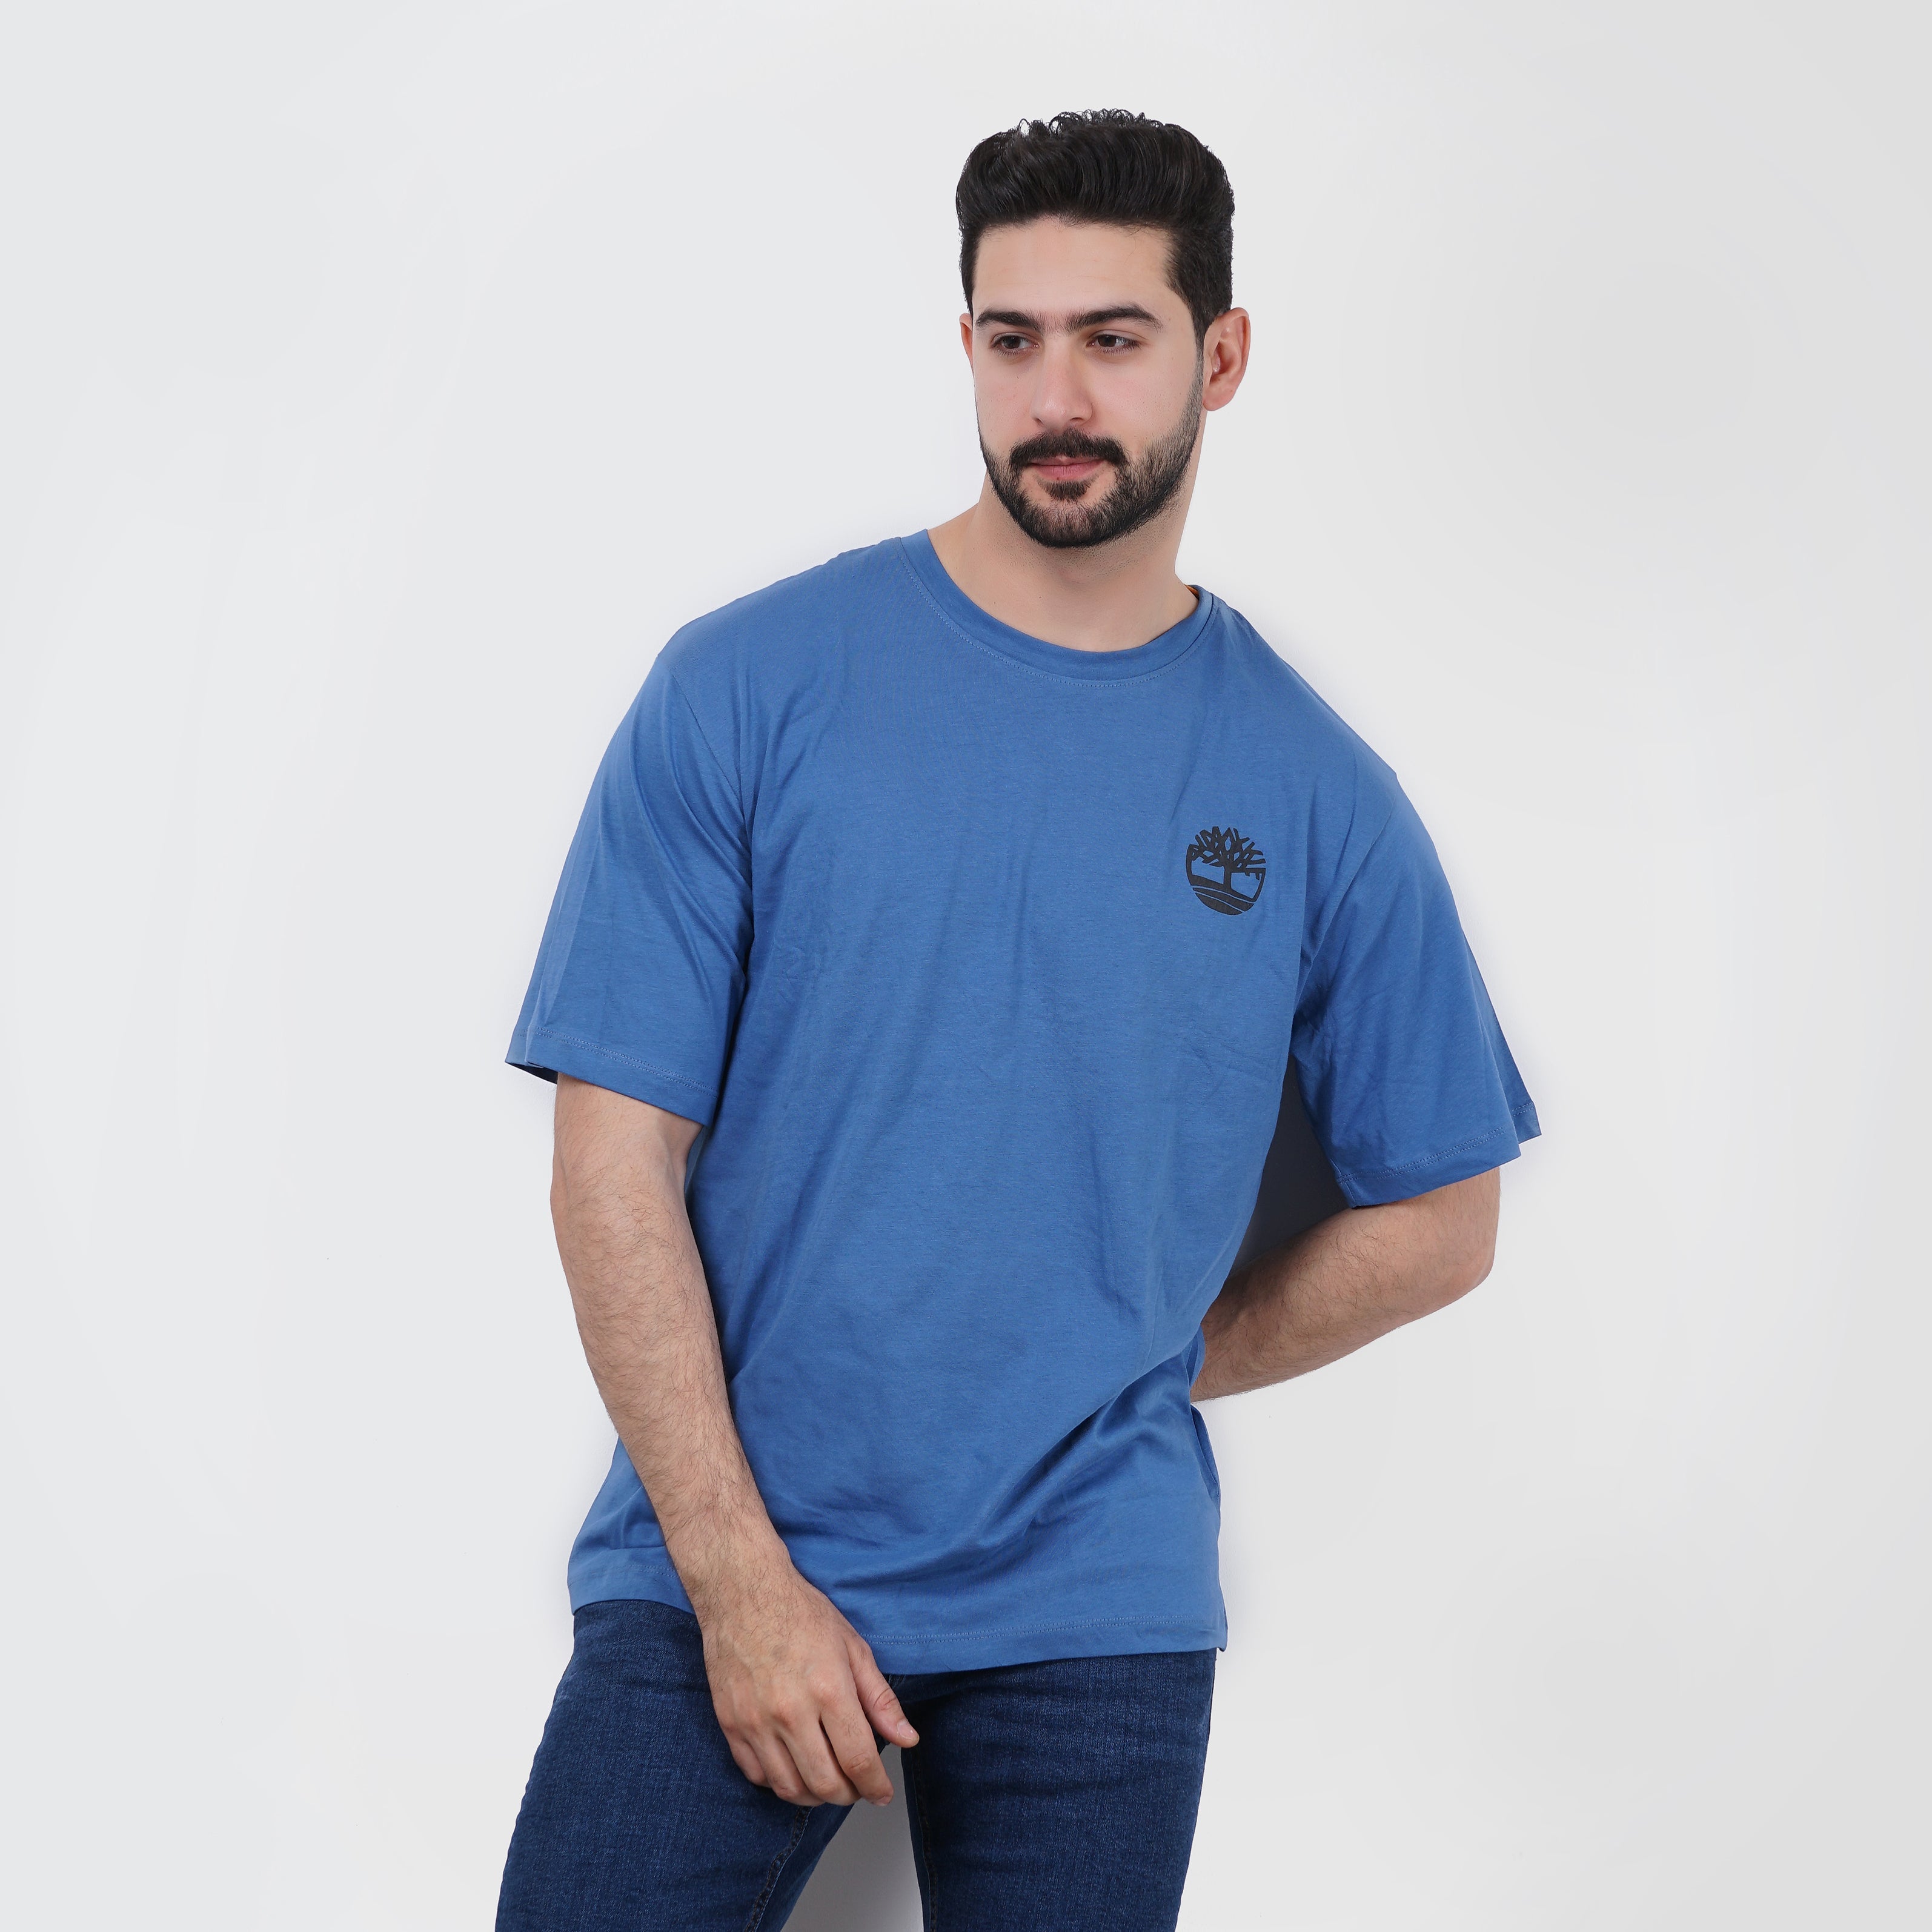 Man modeling a blue casual Timberland t-shirt and jeans, isolated on white background.